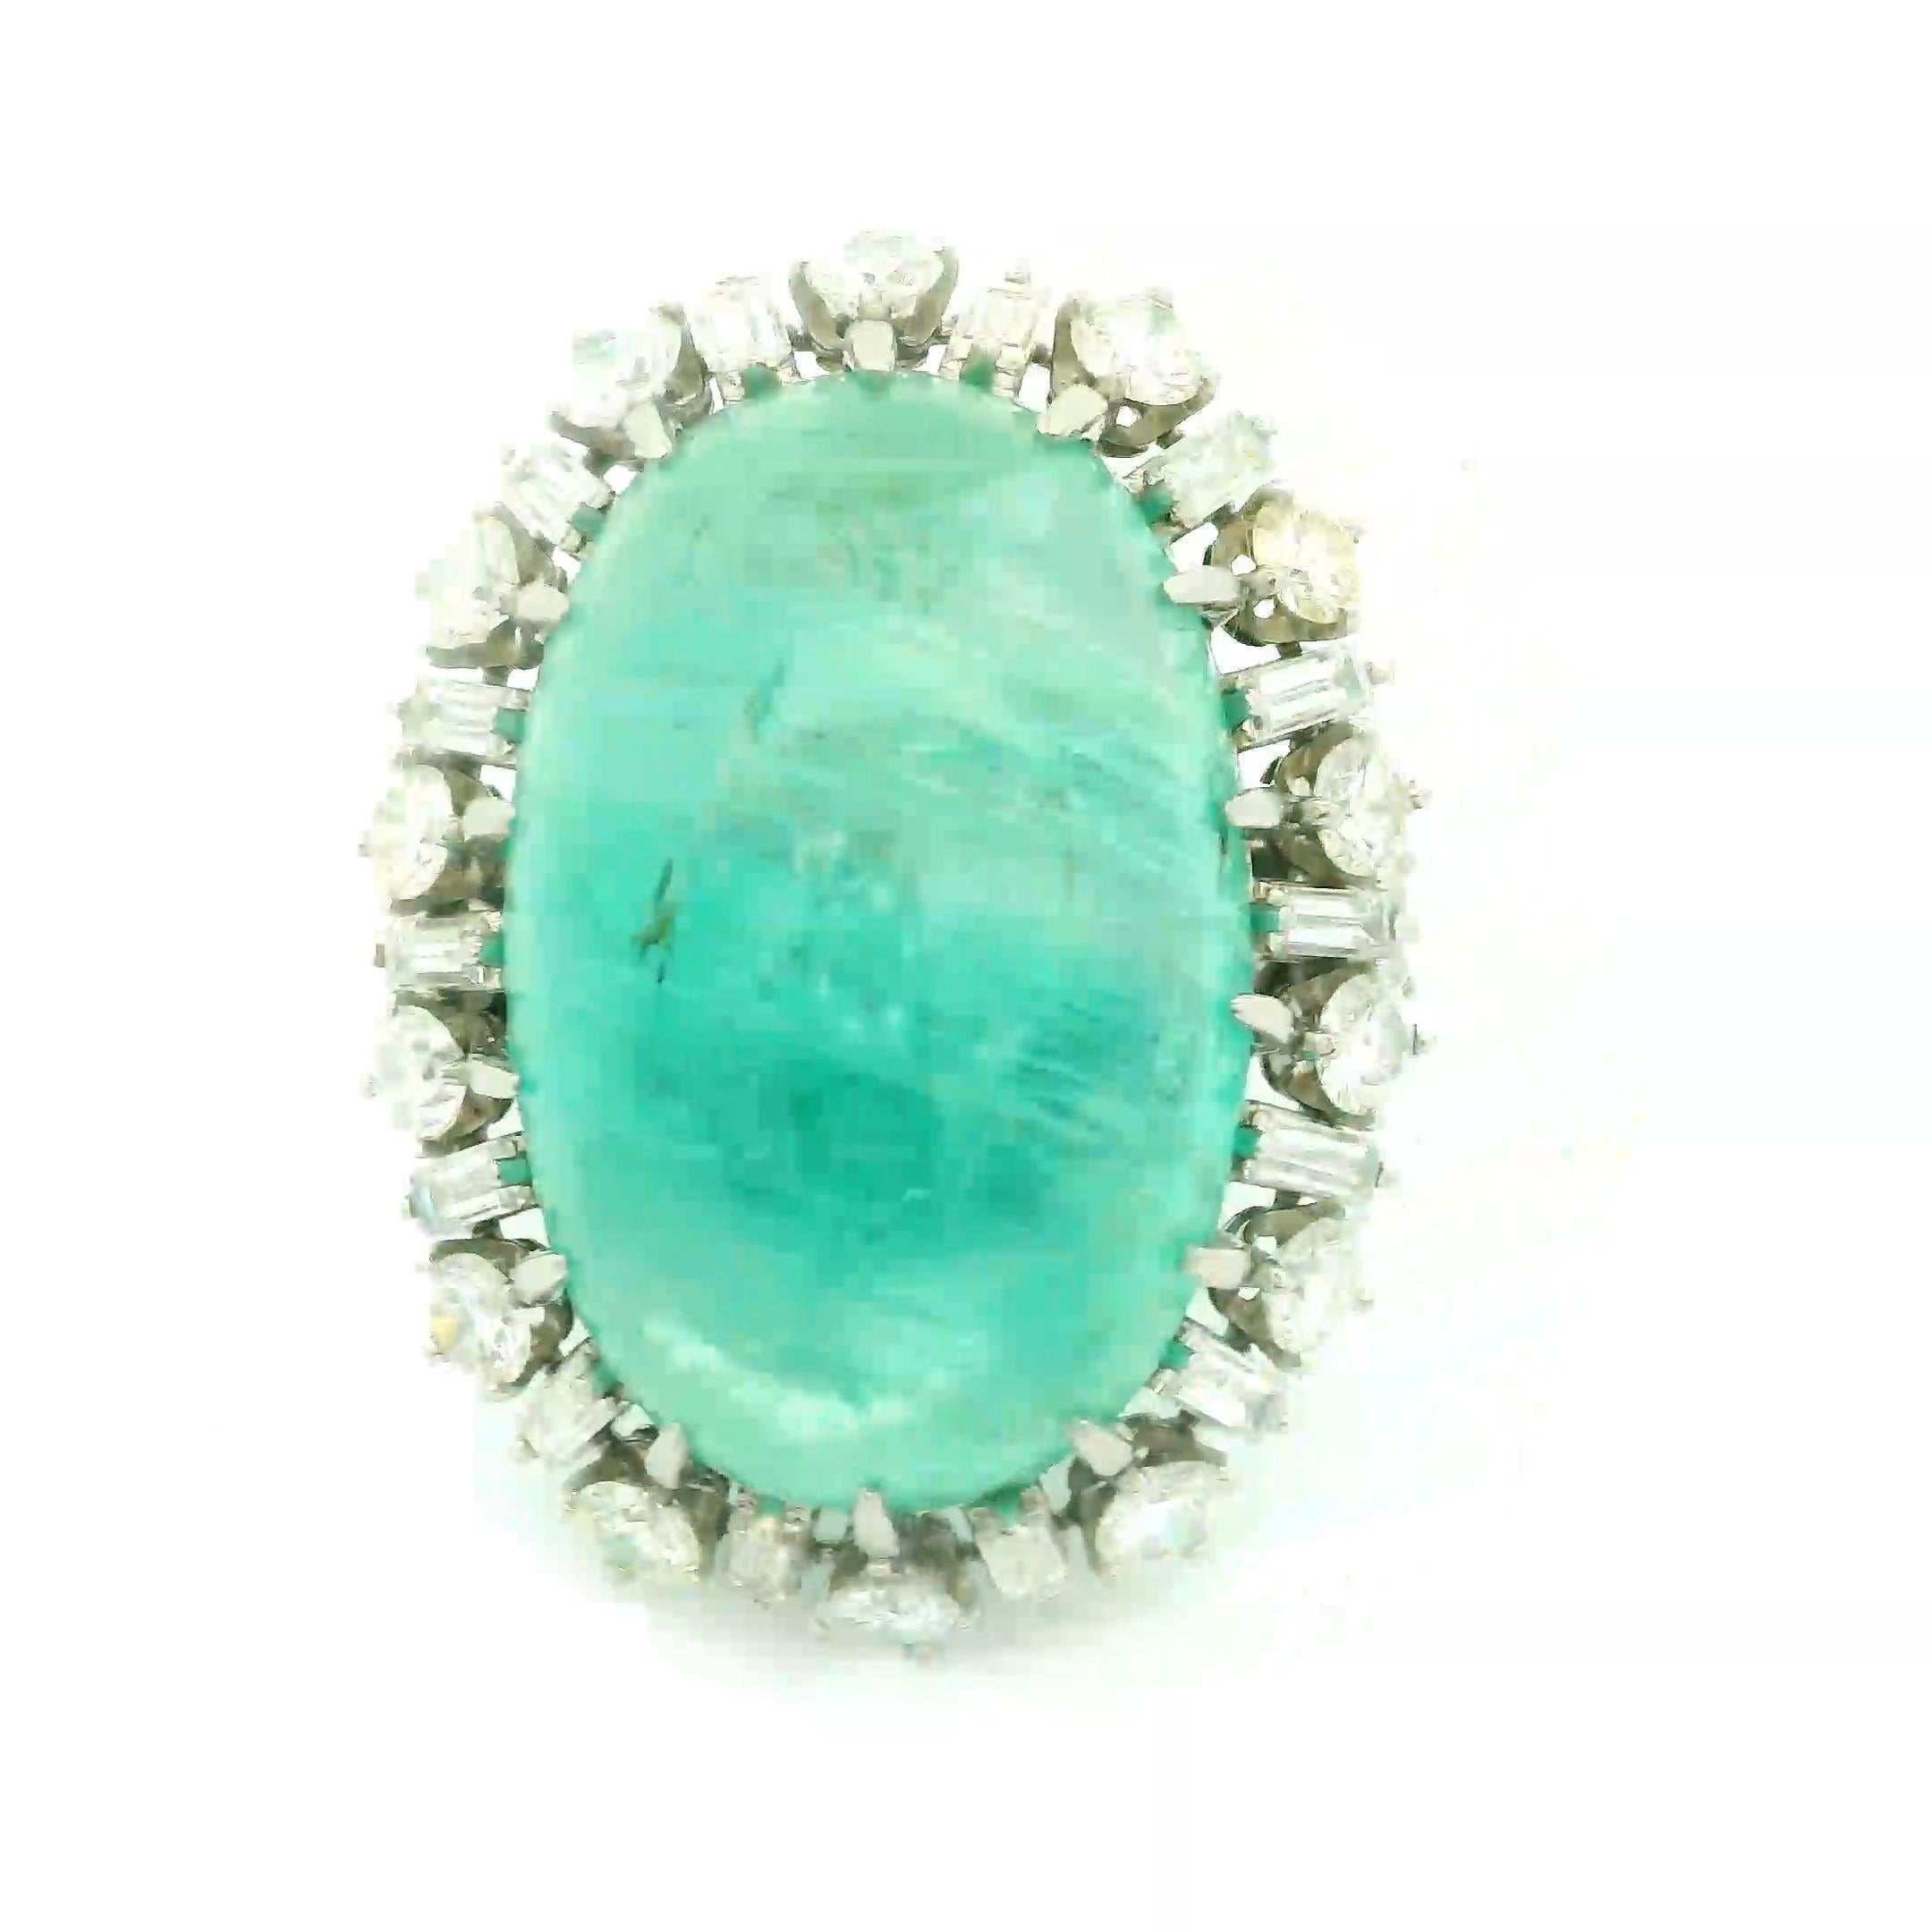 A unique and special ring featuring a large and impressive emerald weighing approximately 40 carats. The emerald is certified by the GIA as natural with a Russian origin, and it has a soft pleasing green color. It is complemented by round brilliant